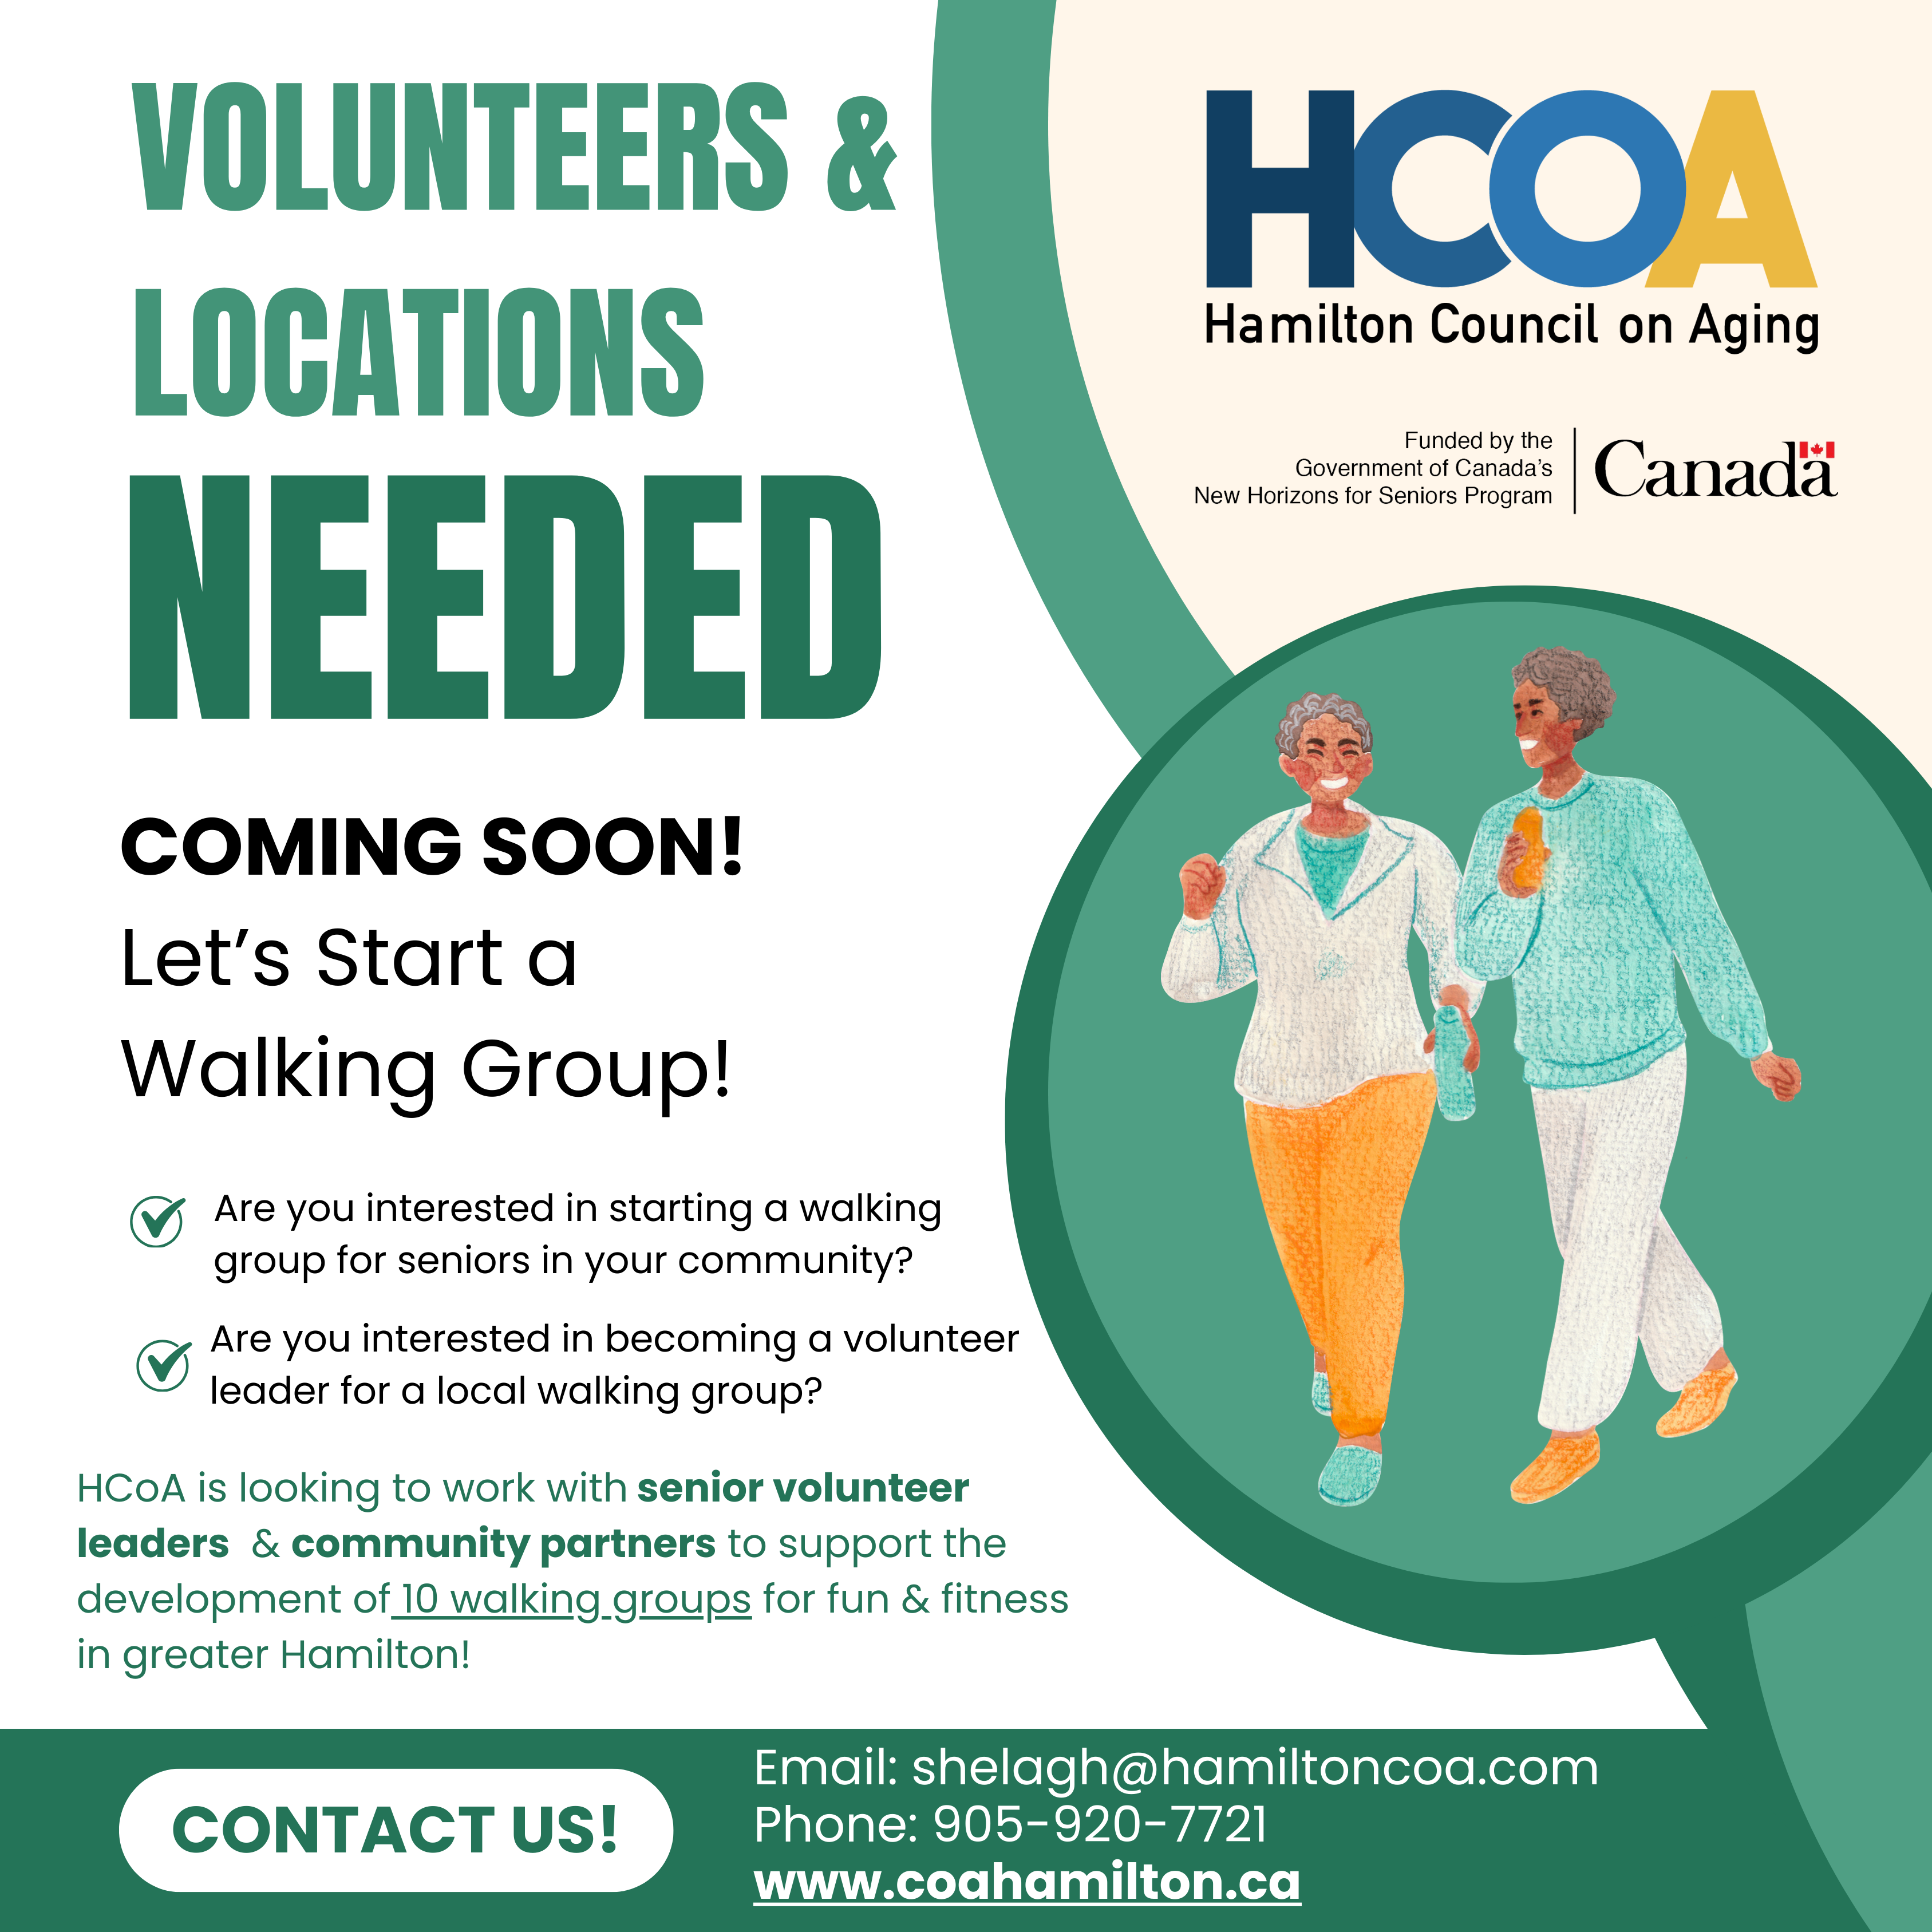 Volunteers and Locations needed: :Let's Start a Walking Group!